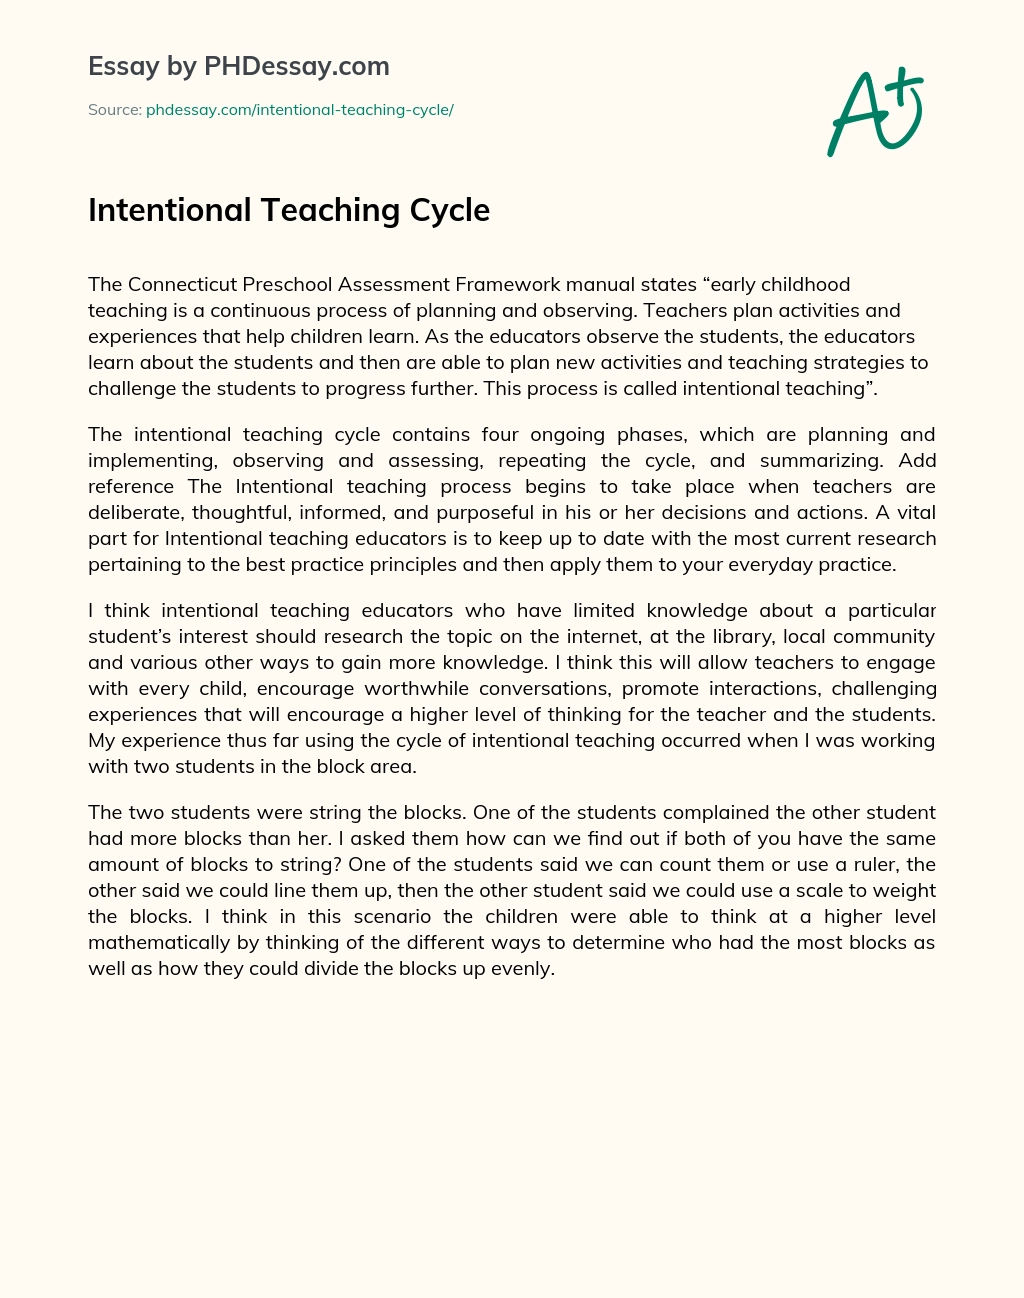 Intentional Teaching Cycle essay